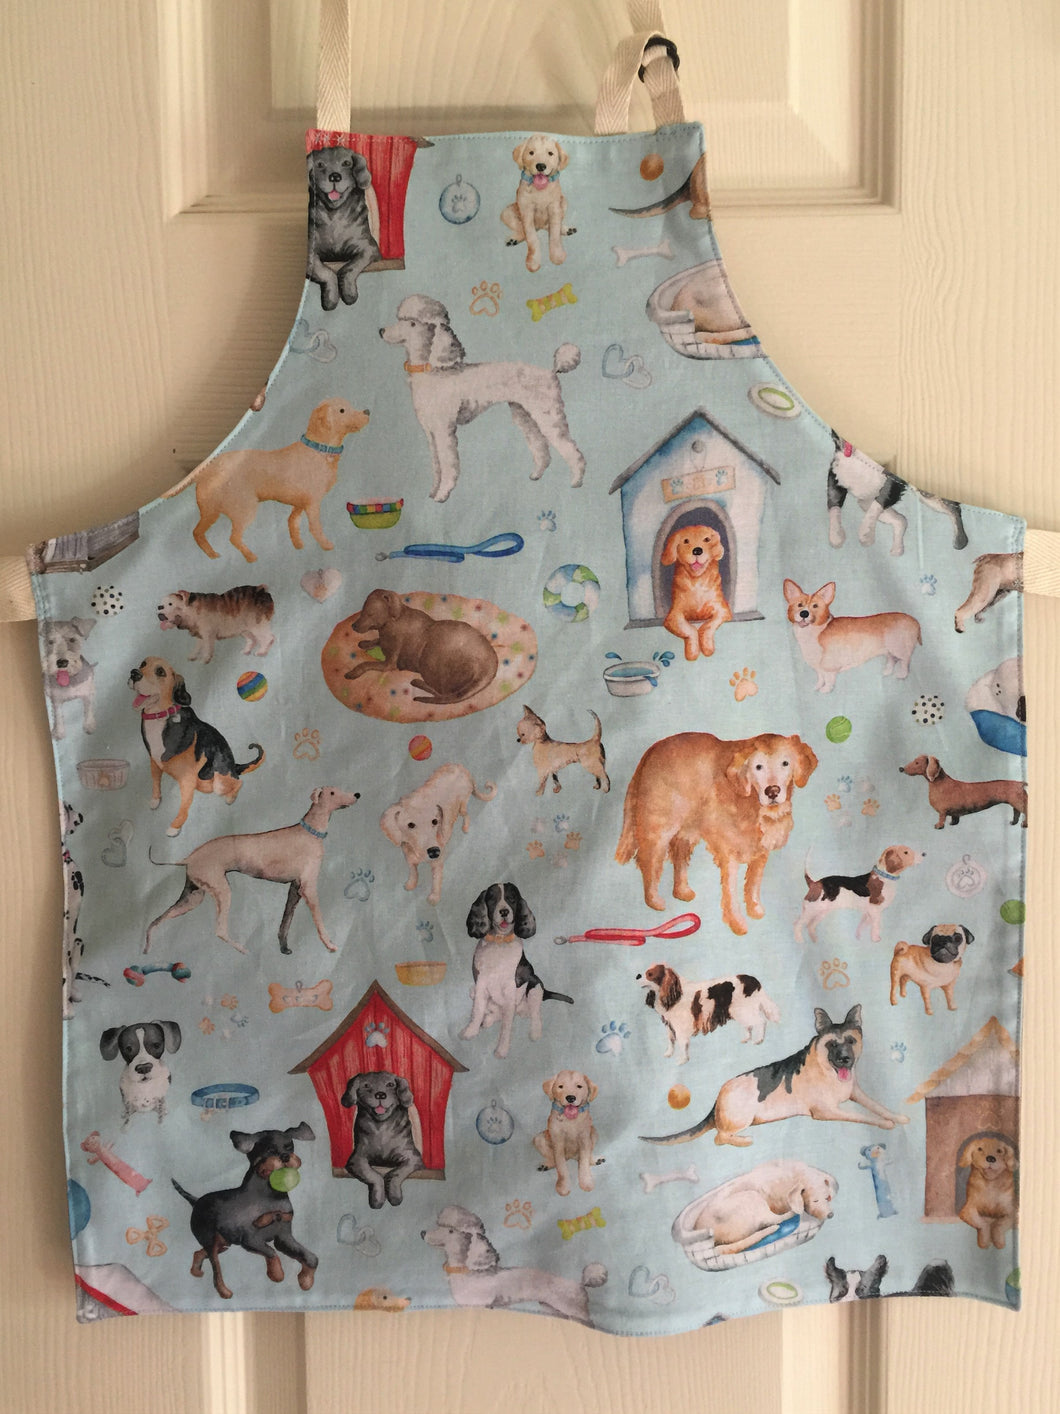 Dogs “Think Pawsitive” stripe; and Dogs “Think Pawsitive – Dogs Rule” – Adult and Child aprons